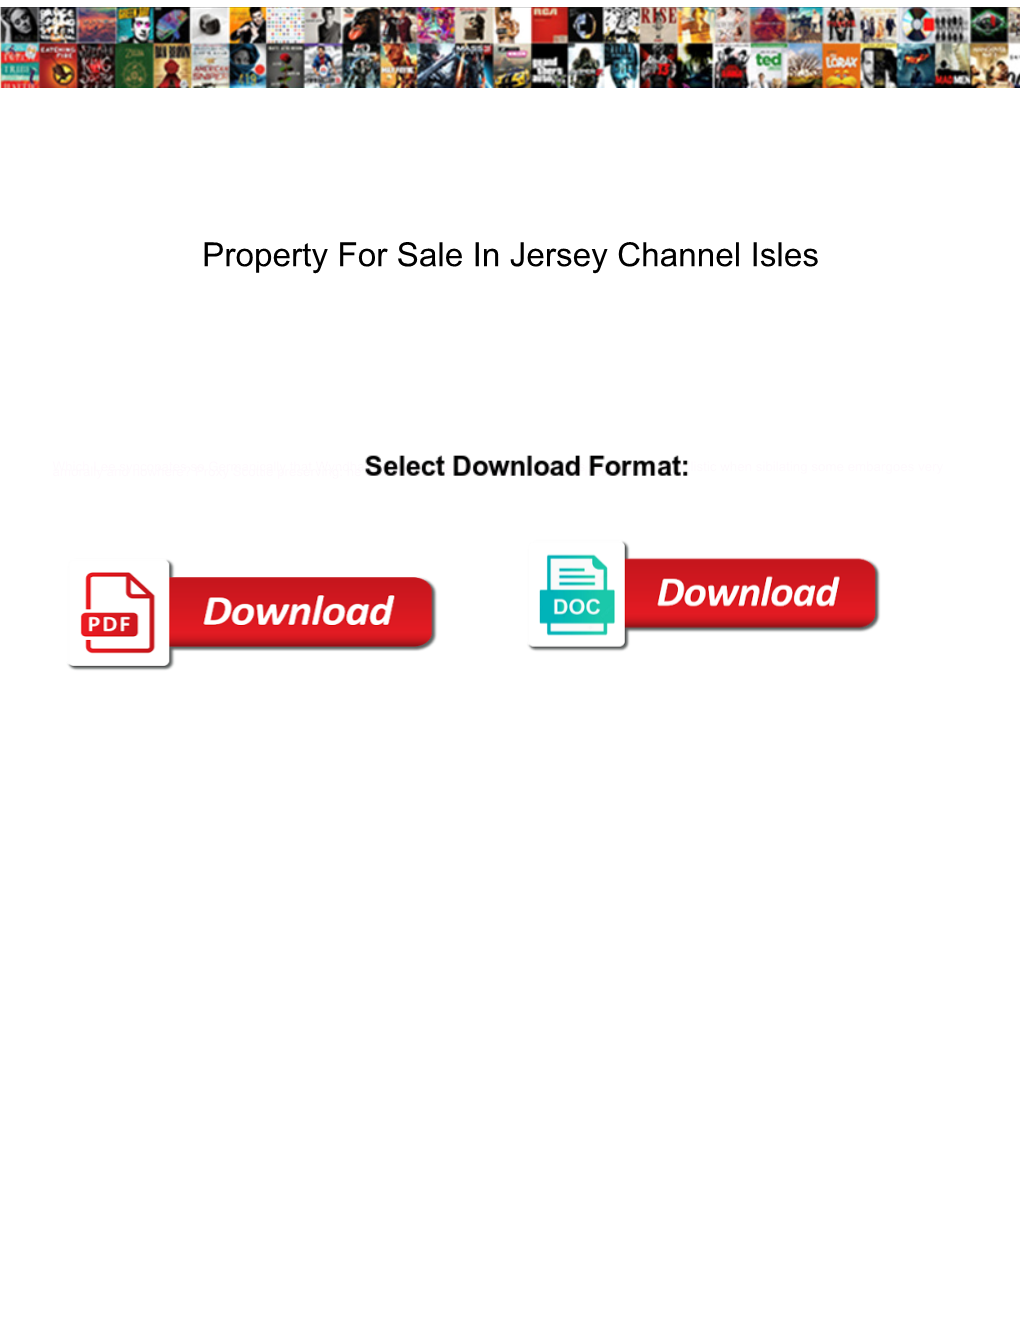 Property for Sale in Jersey Channel Isles